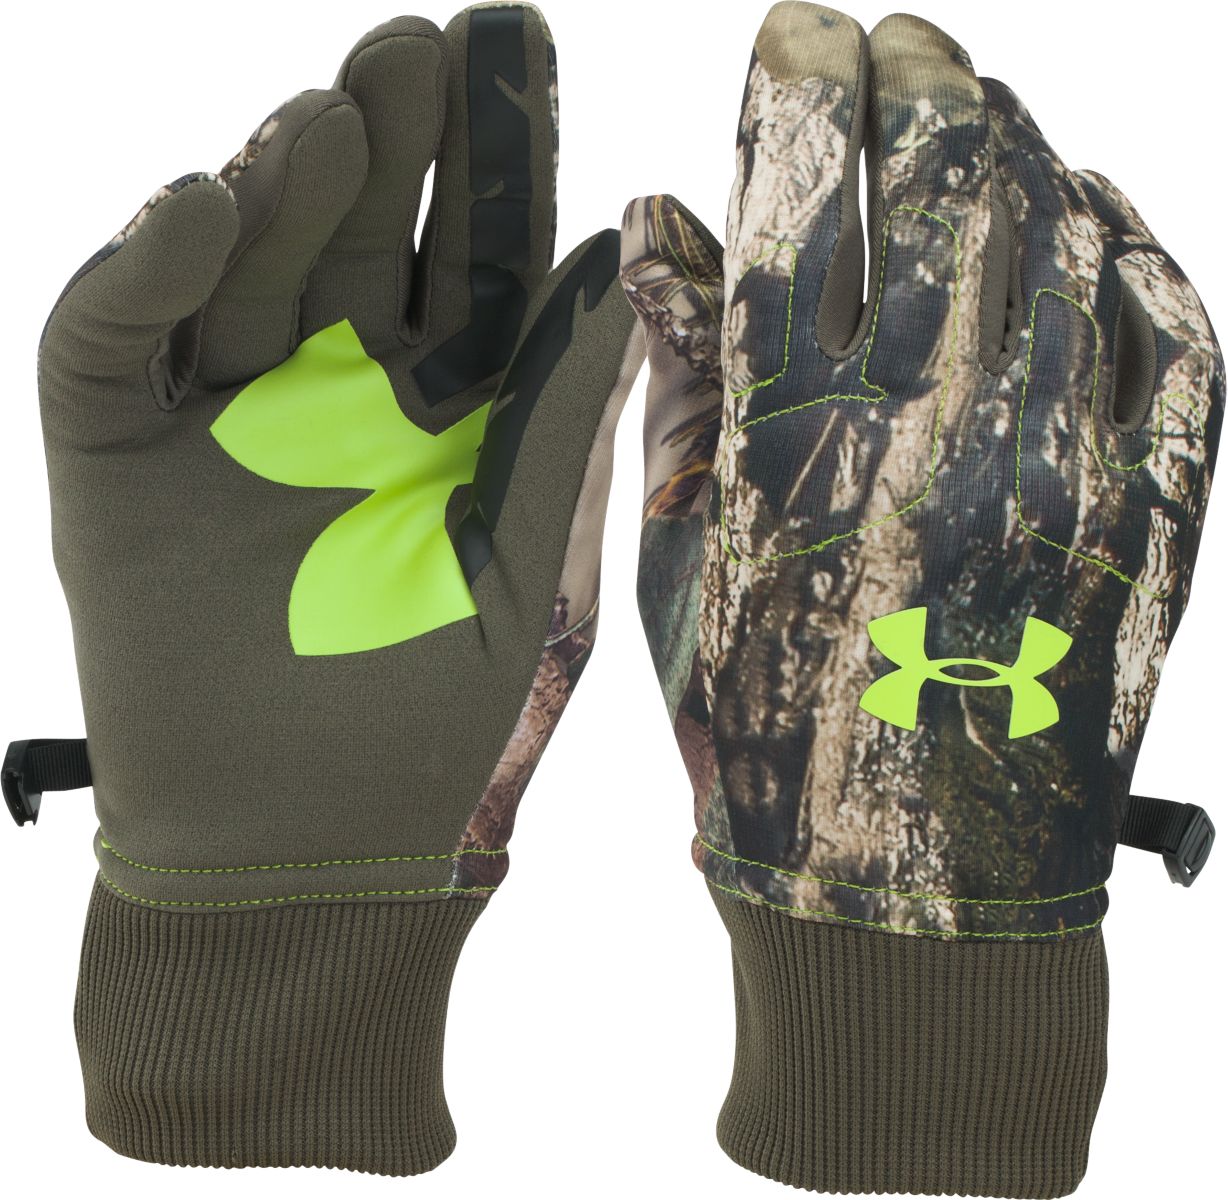 Under Armour Men's Scent Control Mossy Oak Break-Up Country Fleece Gloves - $14.88 (Free 2-Day Shipping over $50)